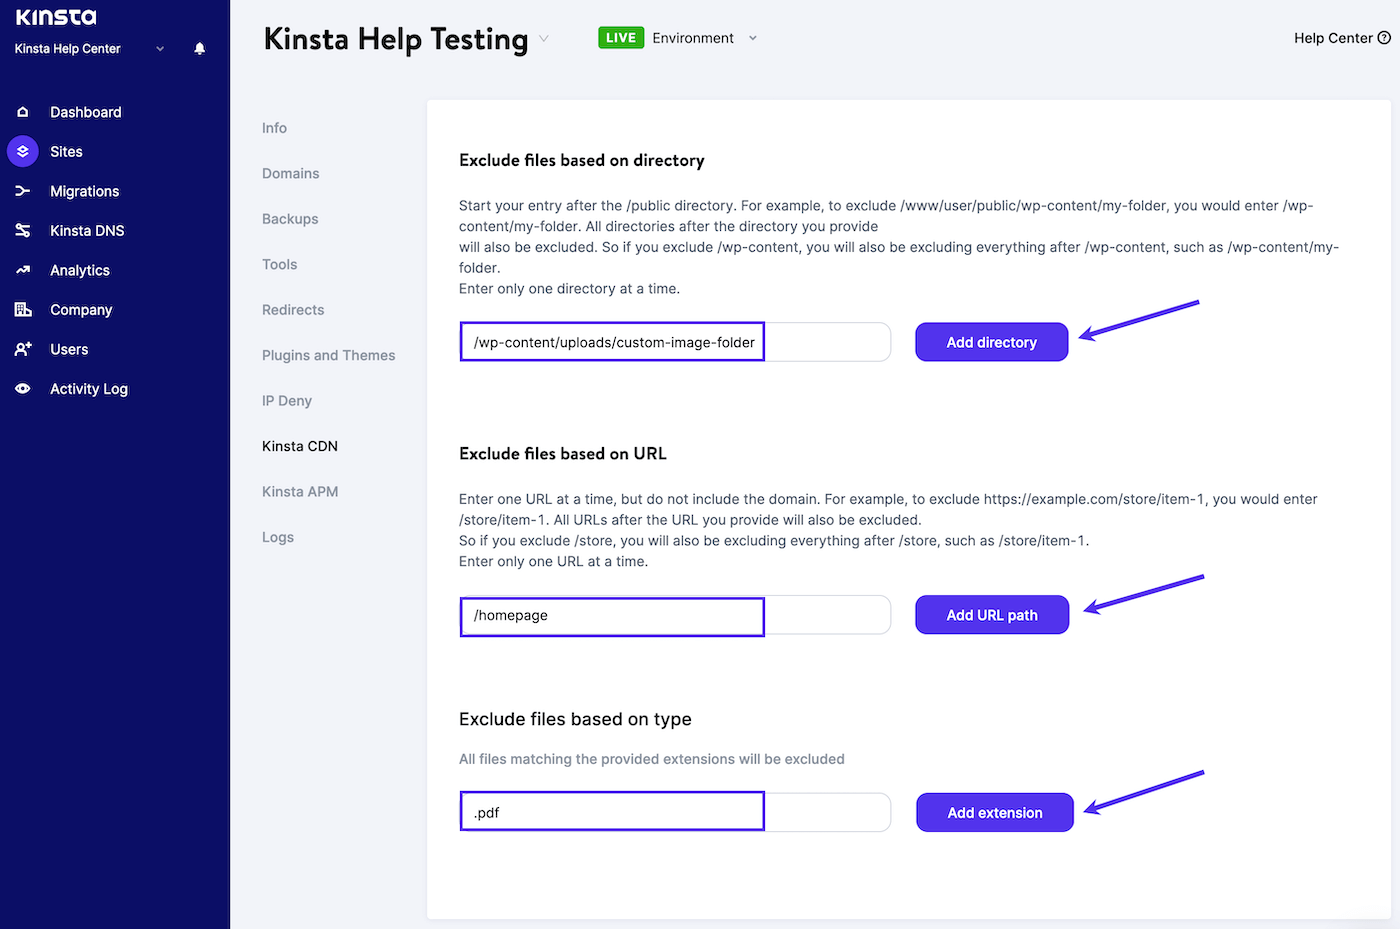 Adding directory, URL, and file exclusions to Kinsta CDN.